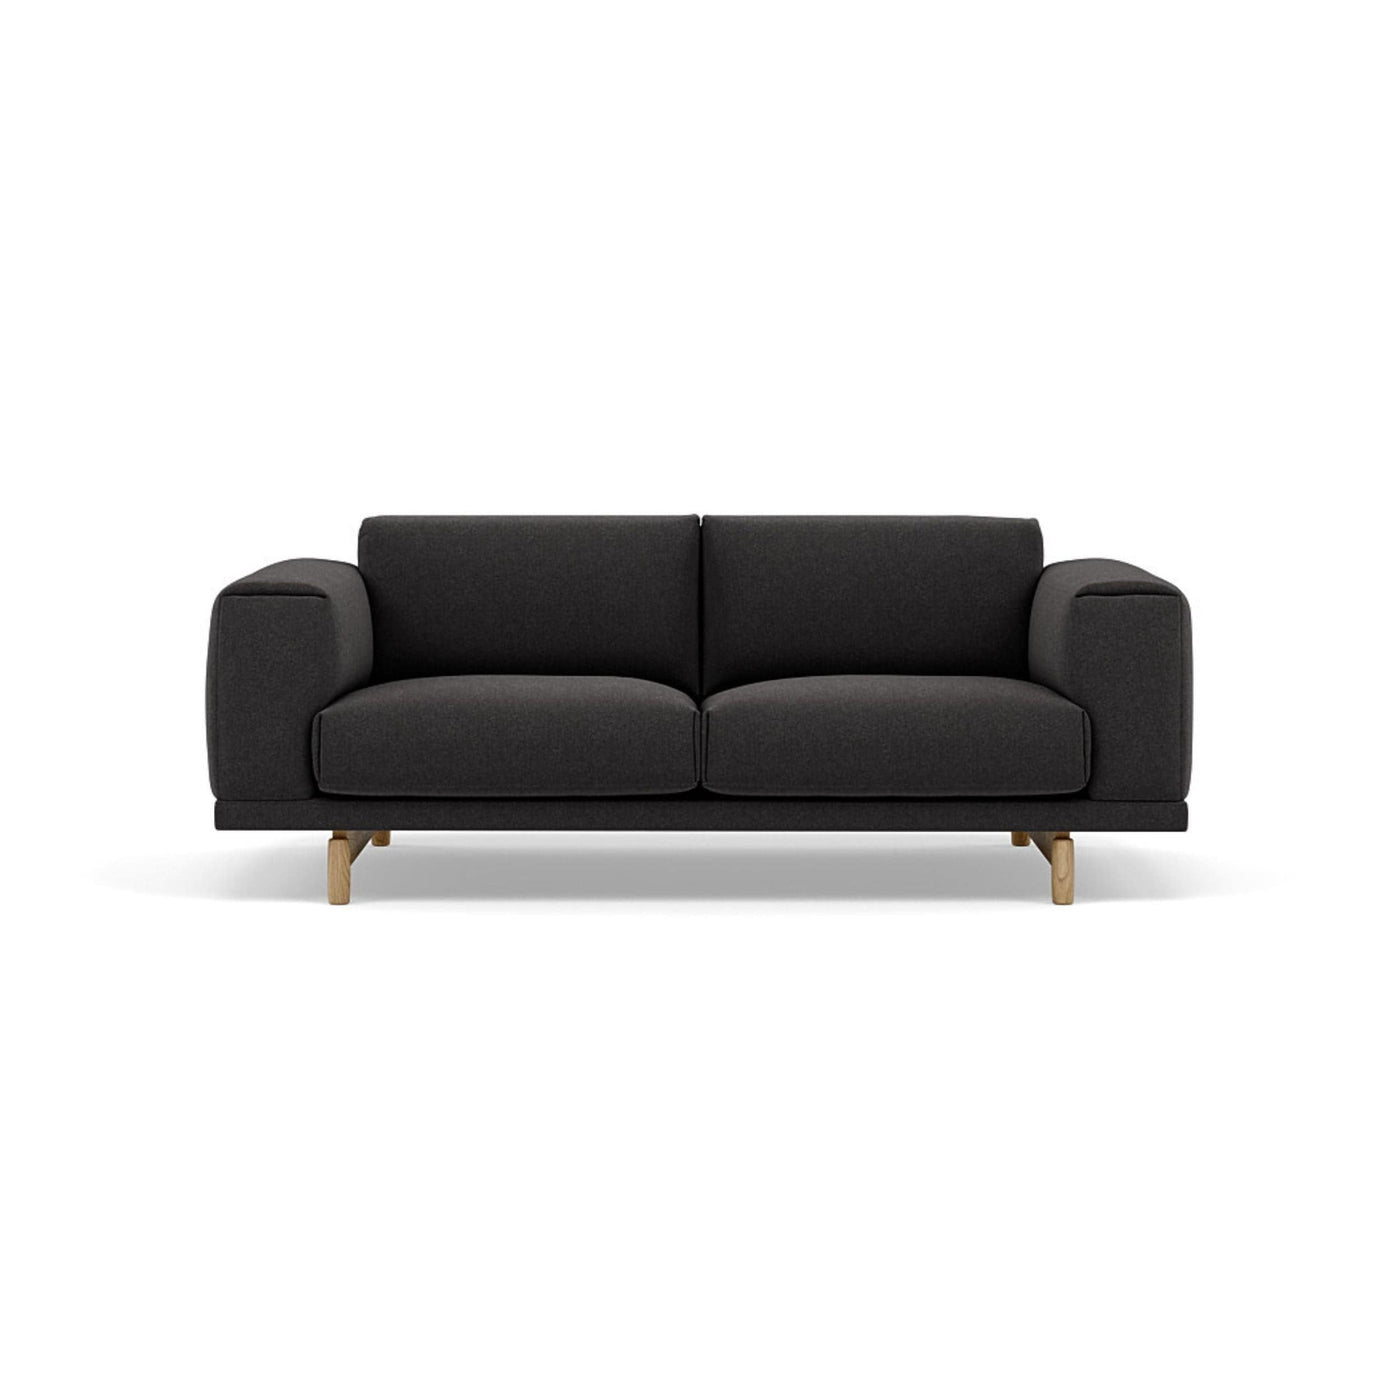 Muuto Rest Sofa 2 seater, available made to order from someday designs. #colour_wooly-1002